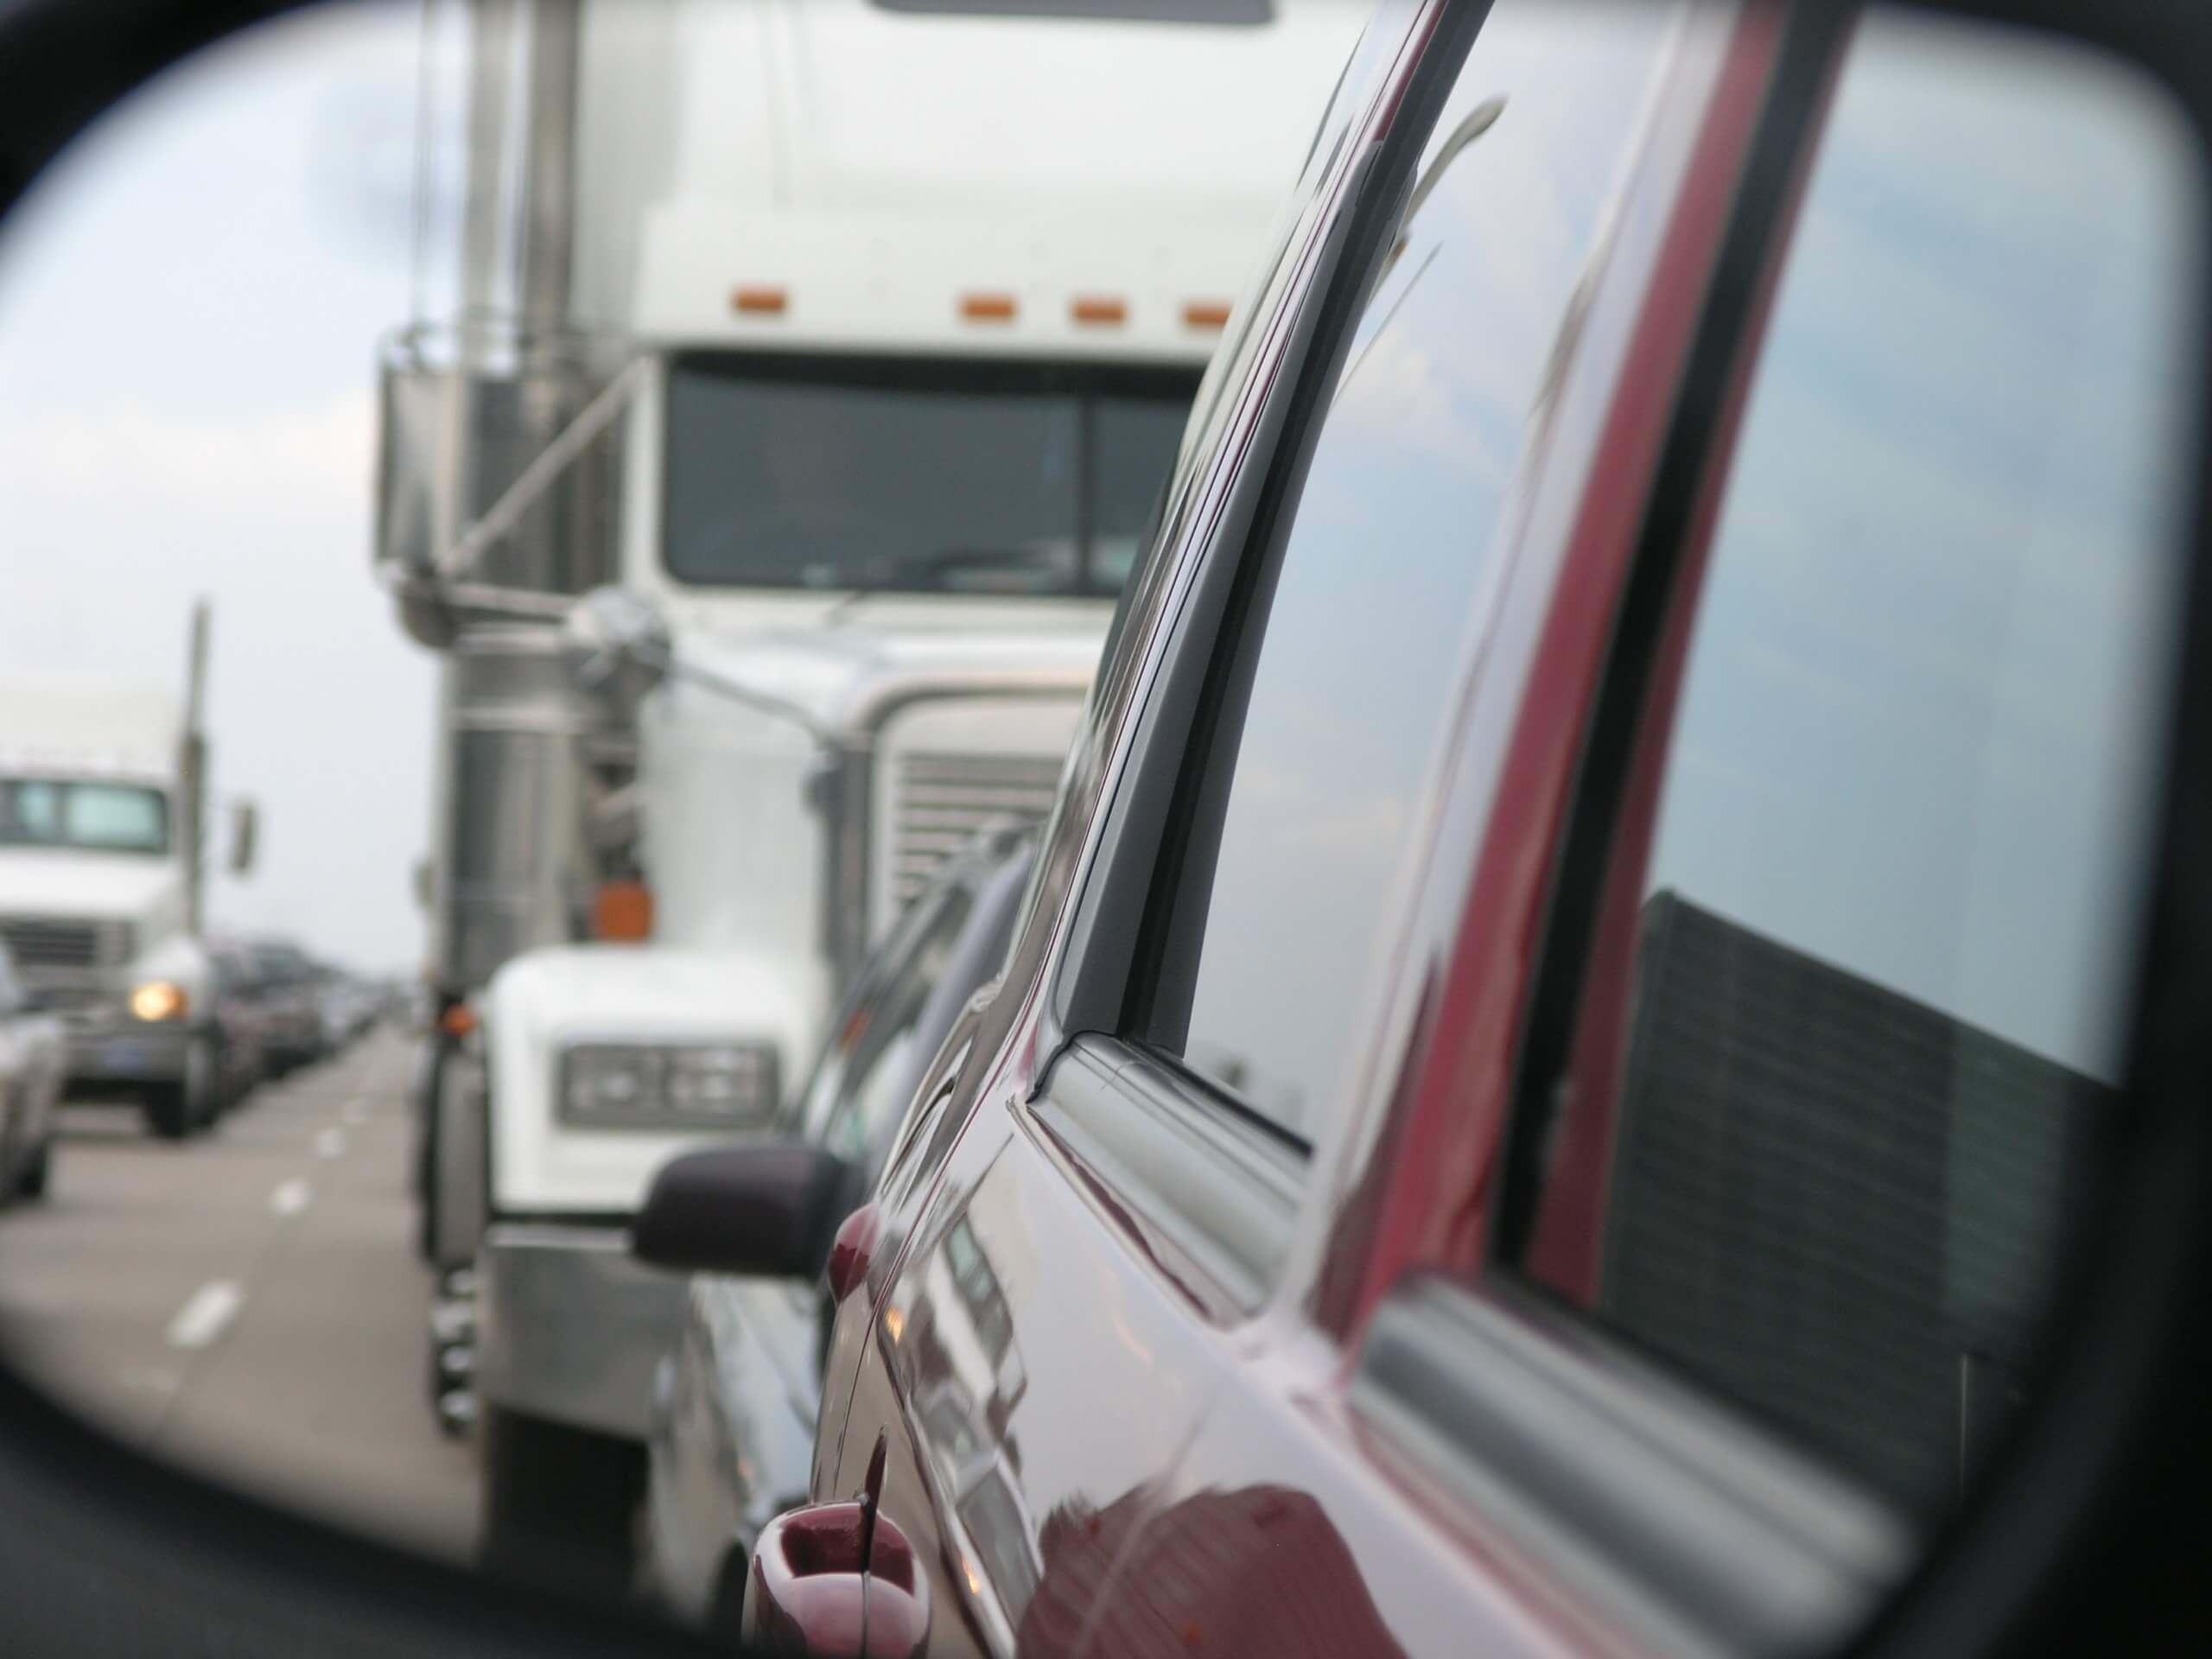 View of a truck in a car's rearview mirror.